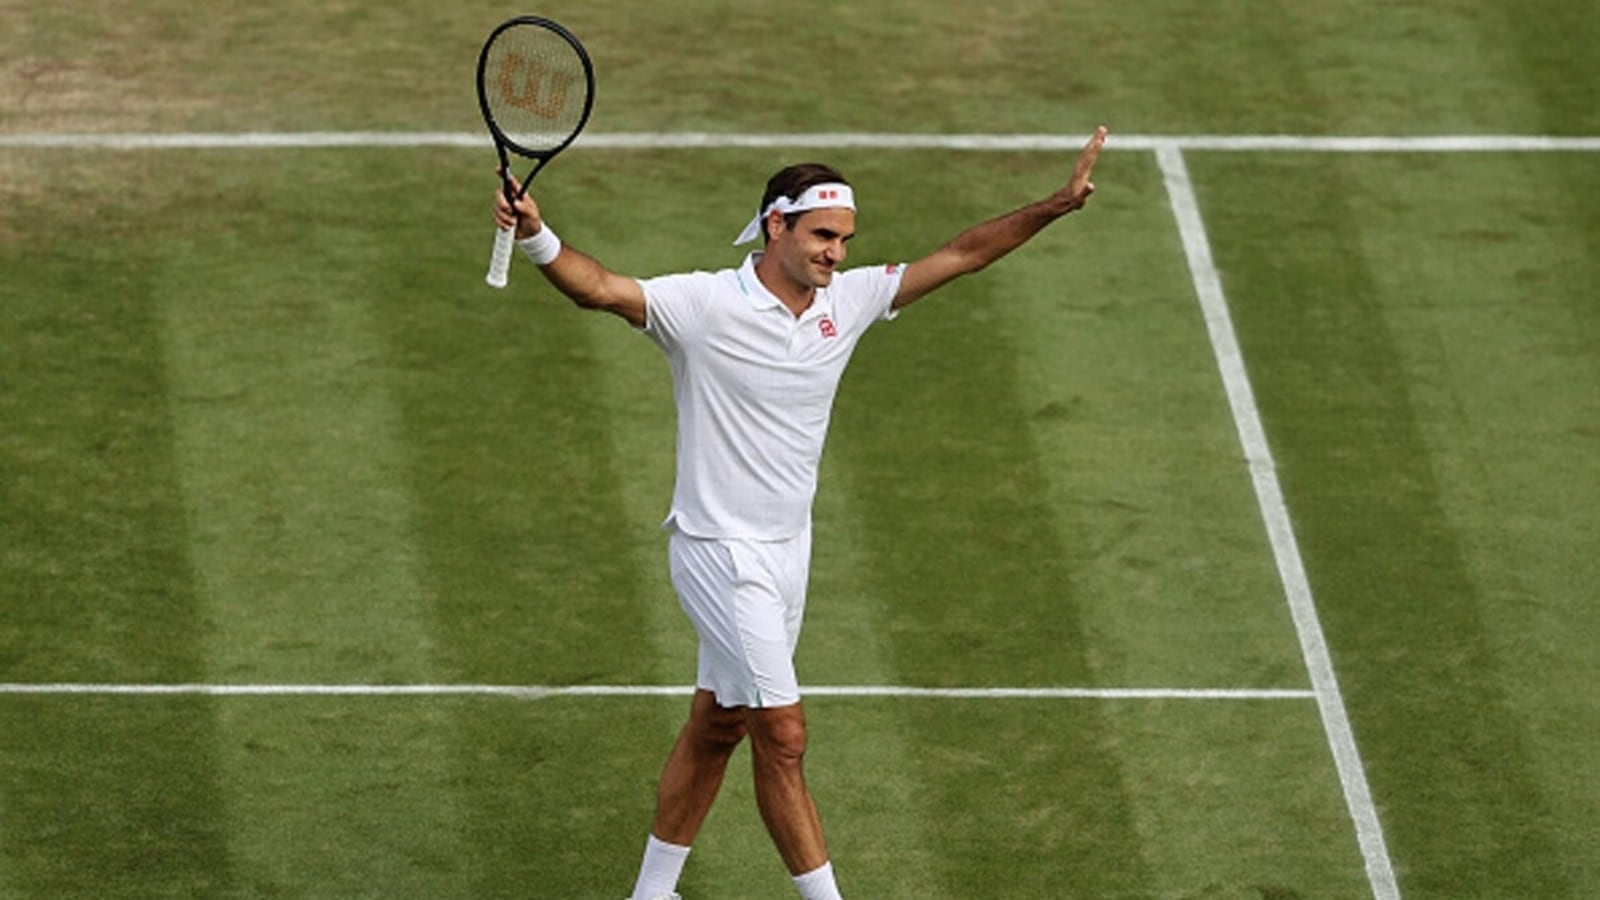 Roger Federer Announces Retirement Laver Cup 2022 To Be Tennis Great S